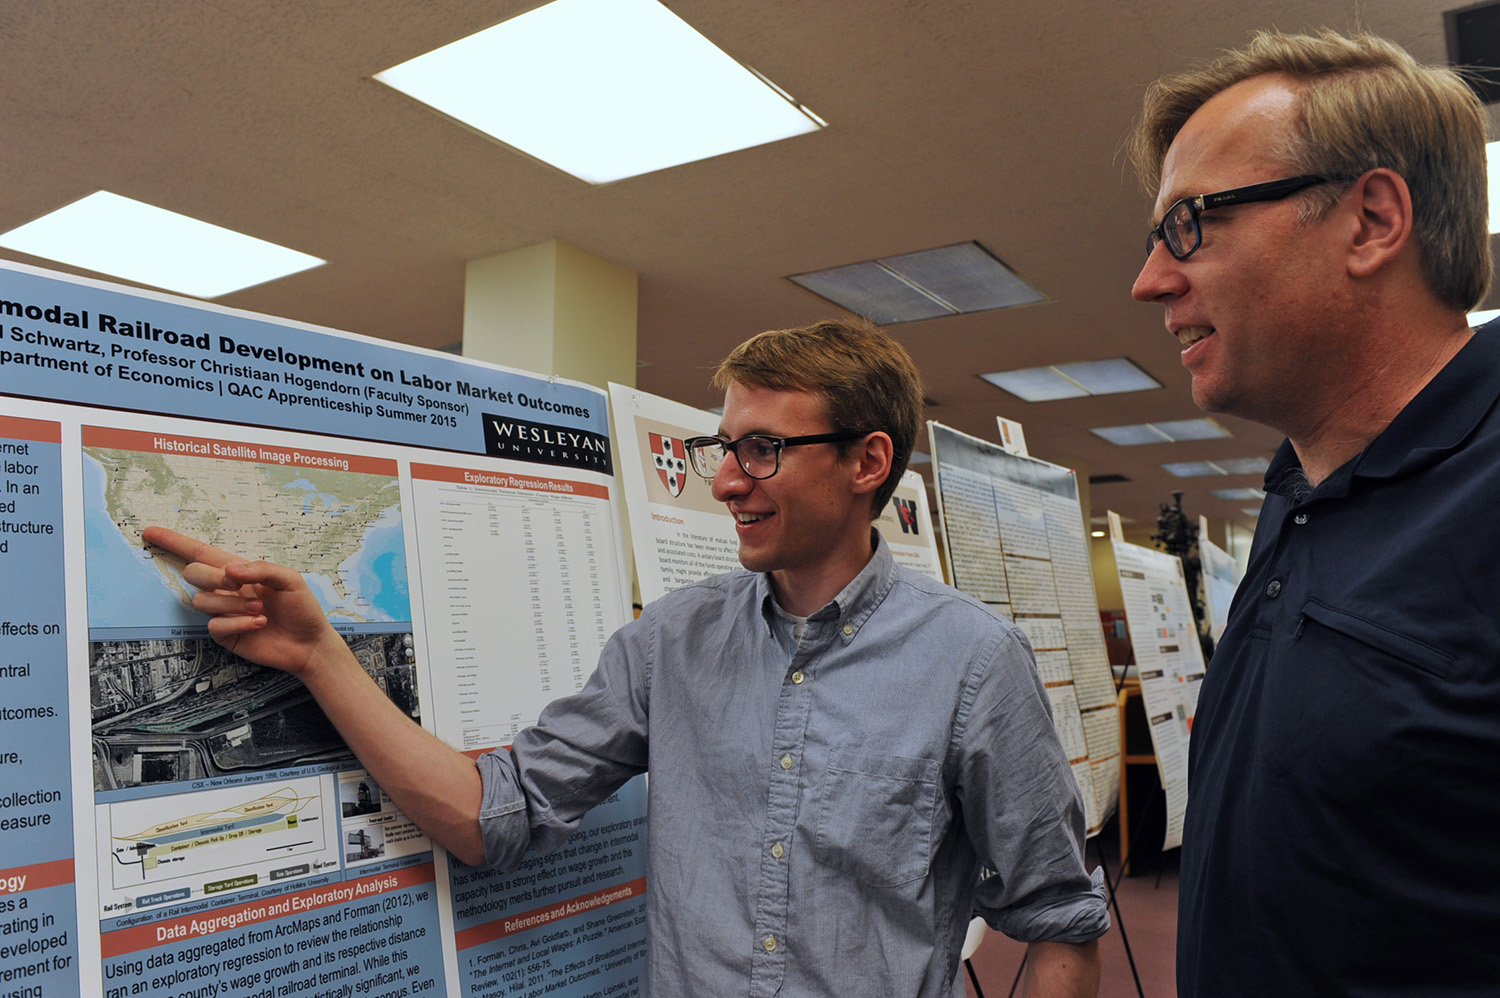 On July 30, the Wesleyan Summer Research Poster Session was held at Exley Science Center. More than 50 undergraduate research fellows presented research at the event. (Photo by Laurie Kenney)